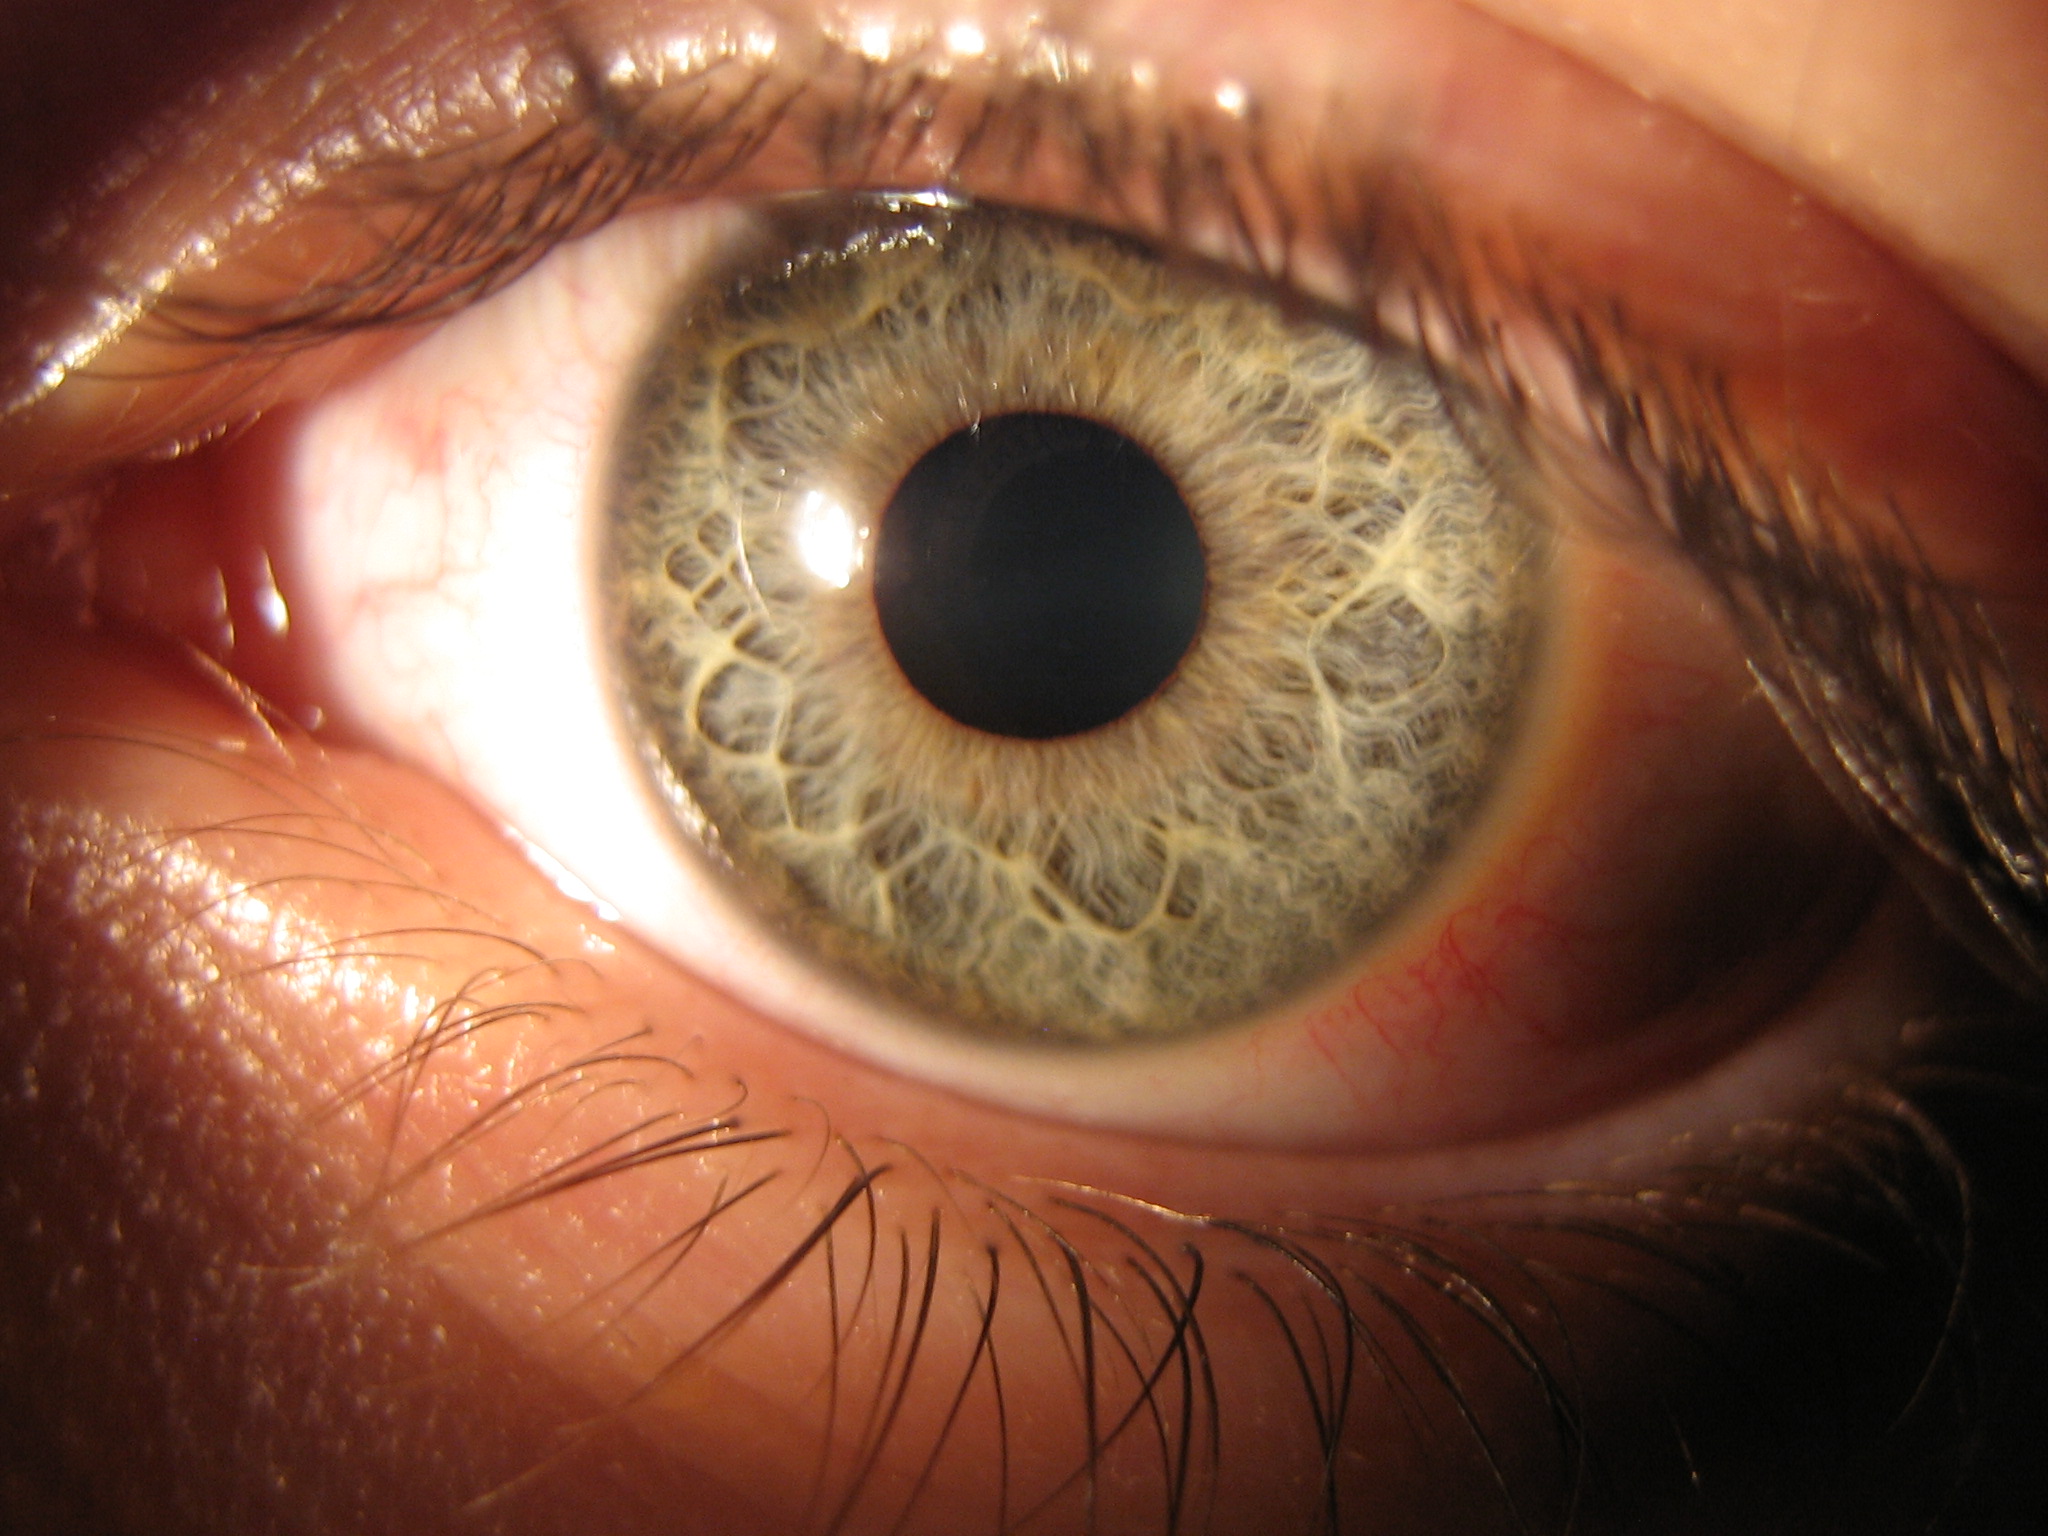 an eye has a light blue circle, and the iris is visible